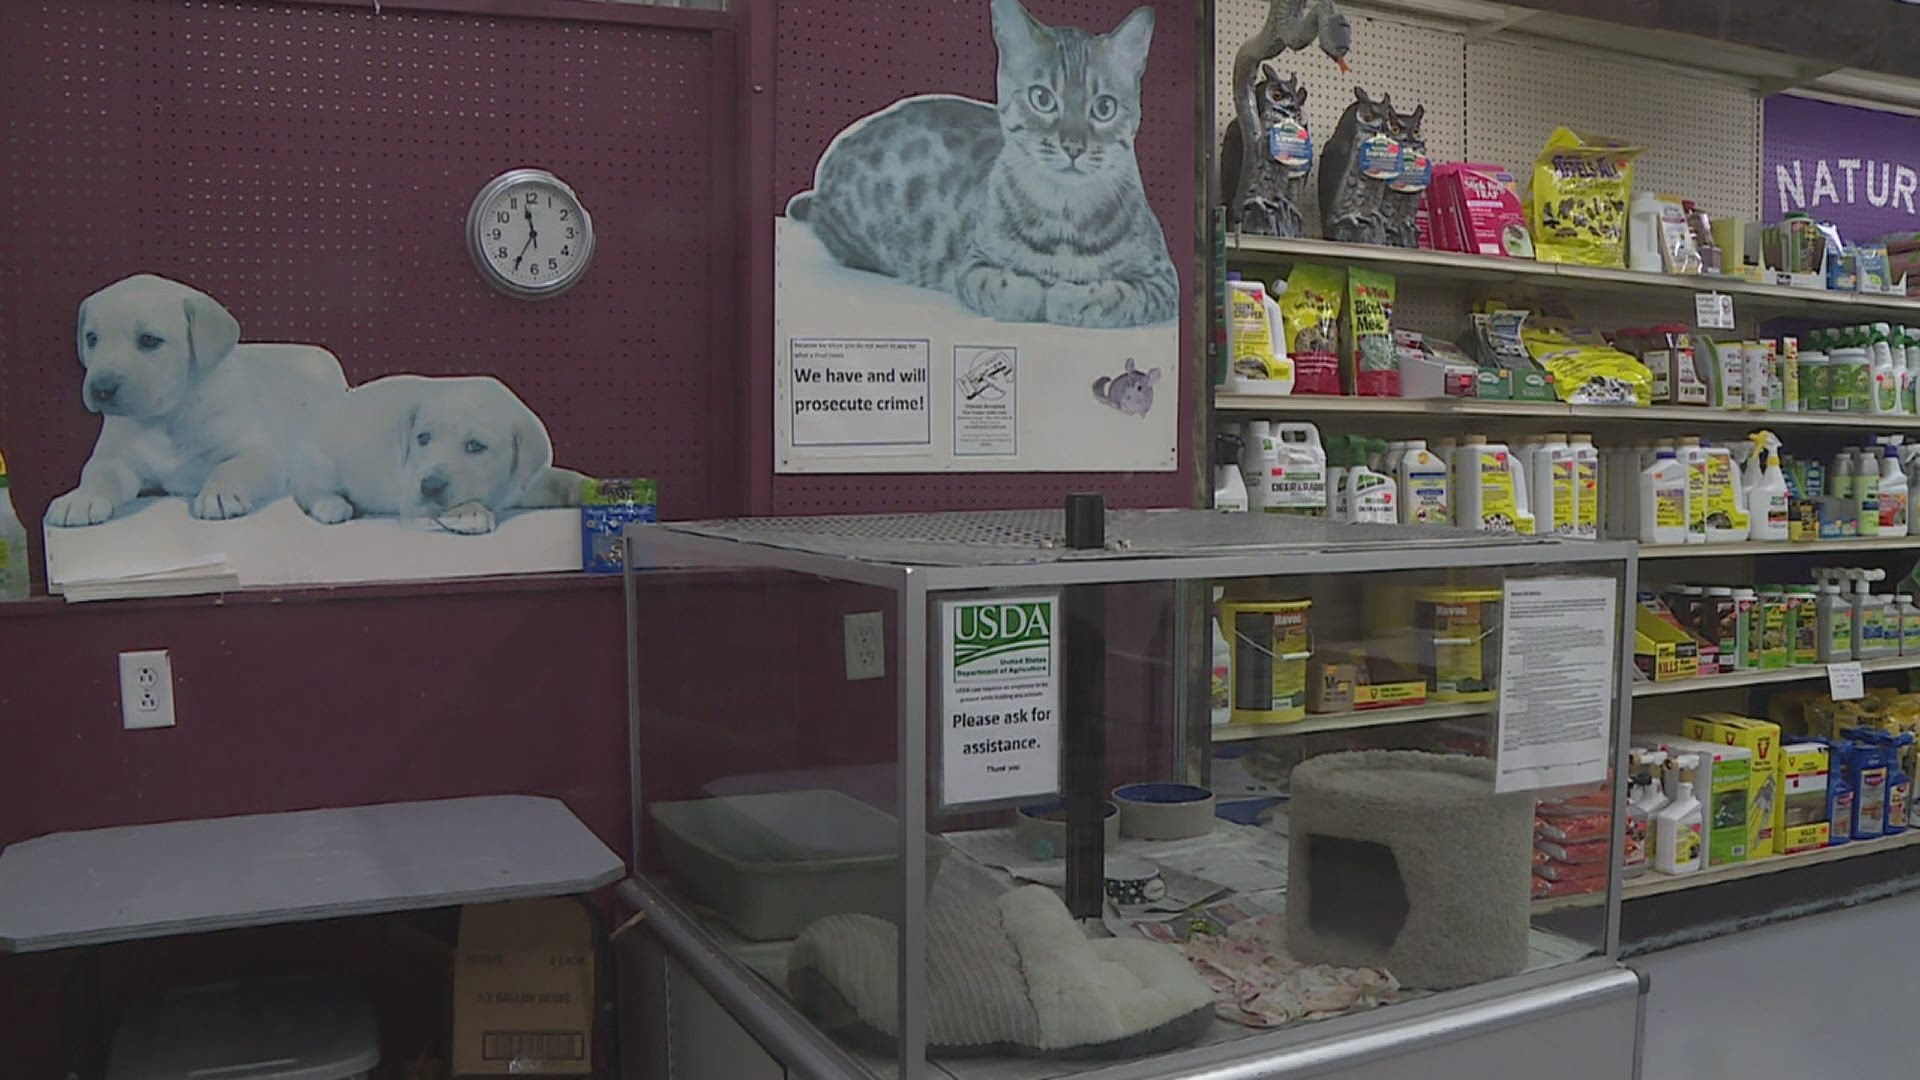 The bill is meant to stop inhumane treatment of animals, but one pet store says it may hinder customers right to choose.